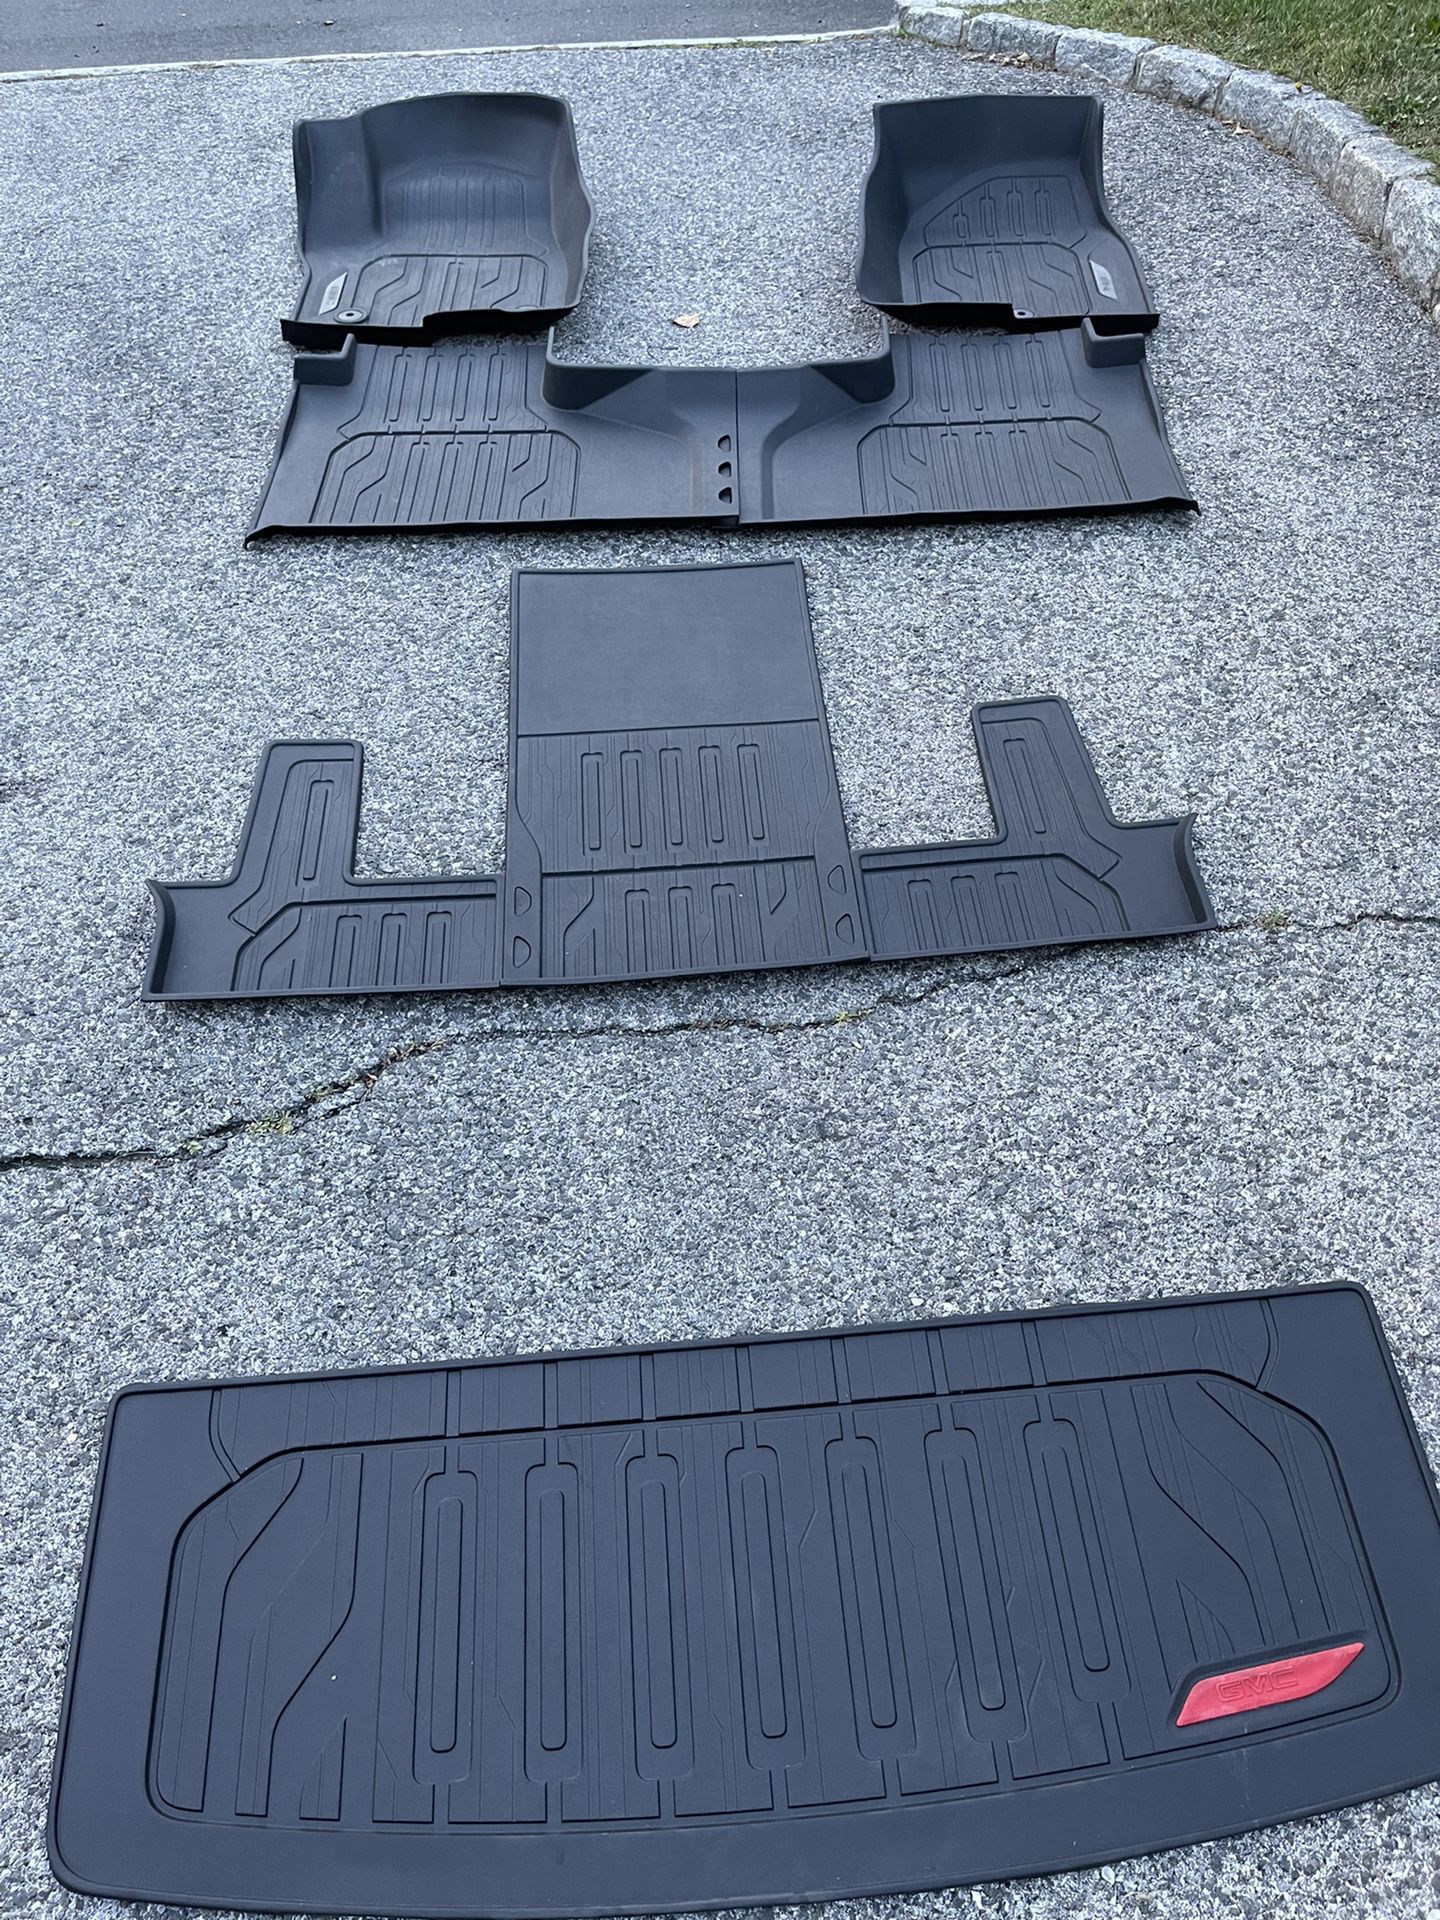 2021 GMC Yukon Denali Complete Floor mat set. All 3 rows plus the rear cargo area. Like new a few months old. 